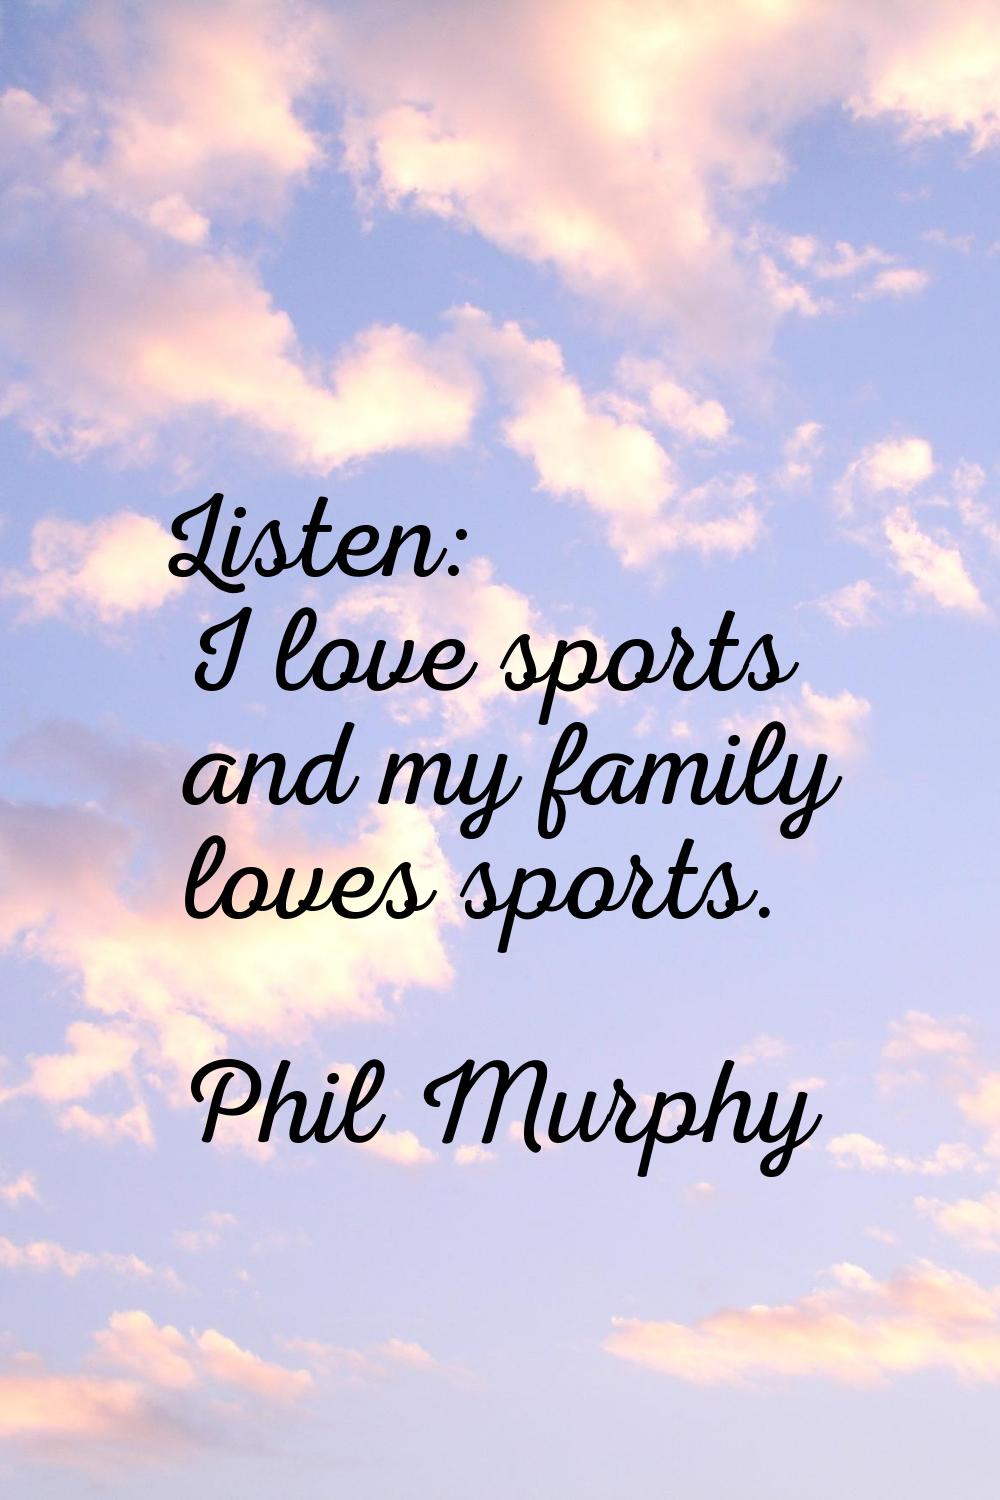 Listen: I love sports and my family loves sports.